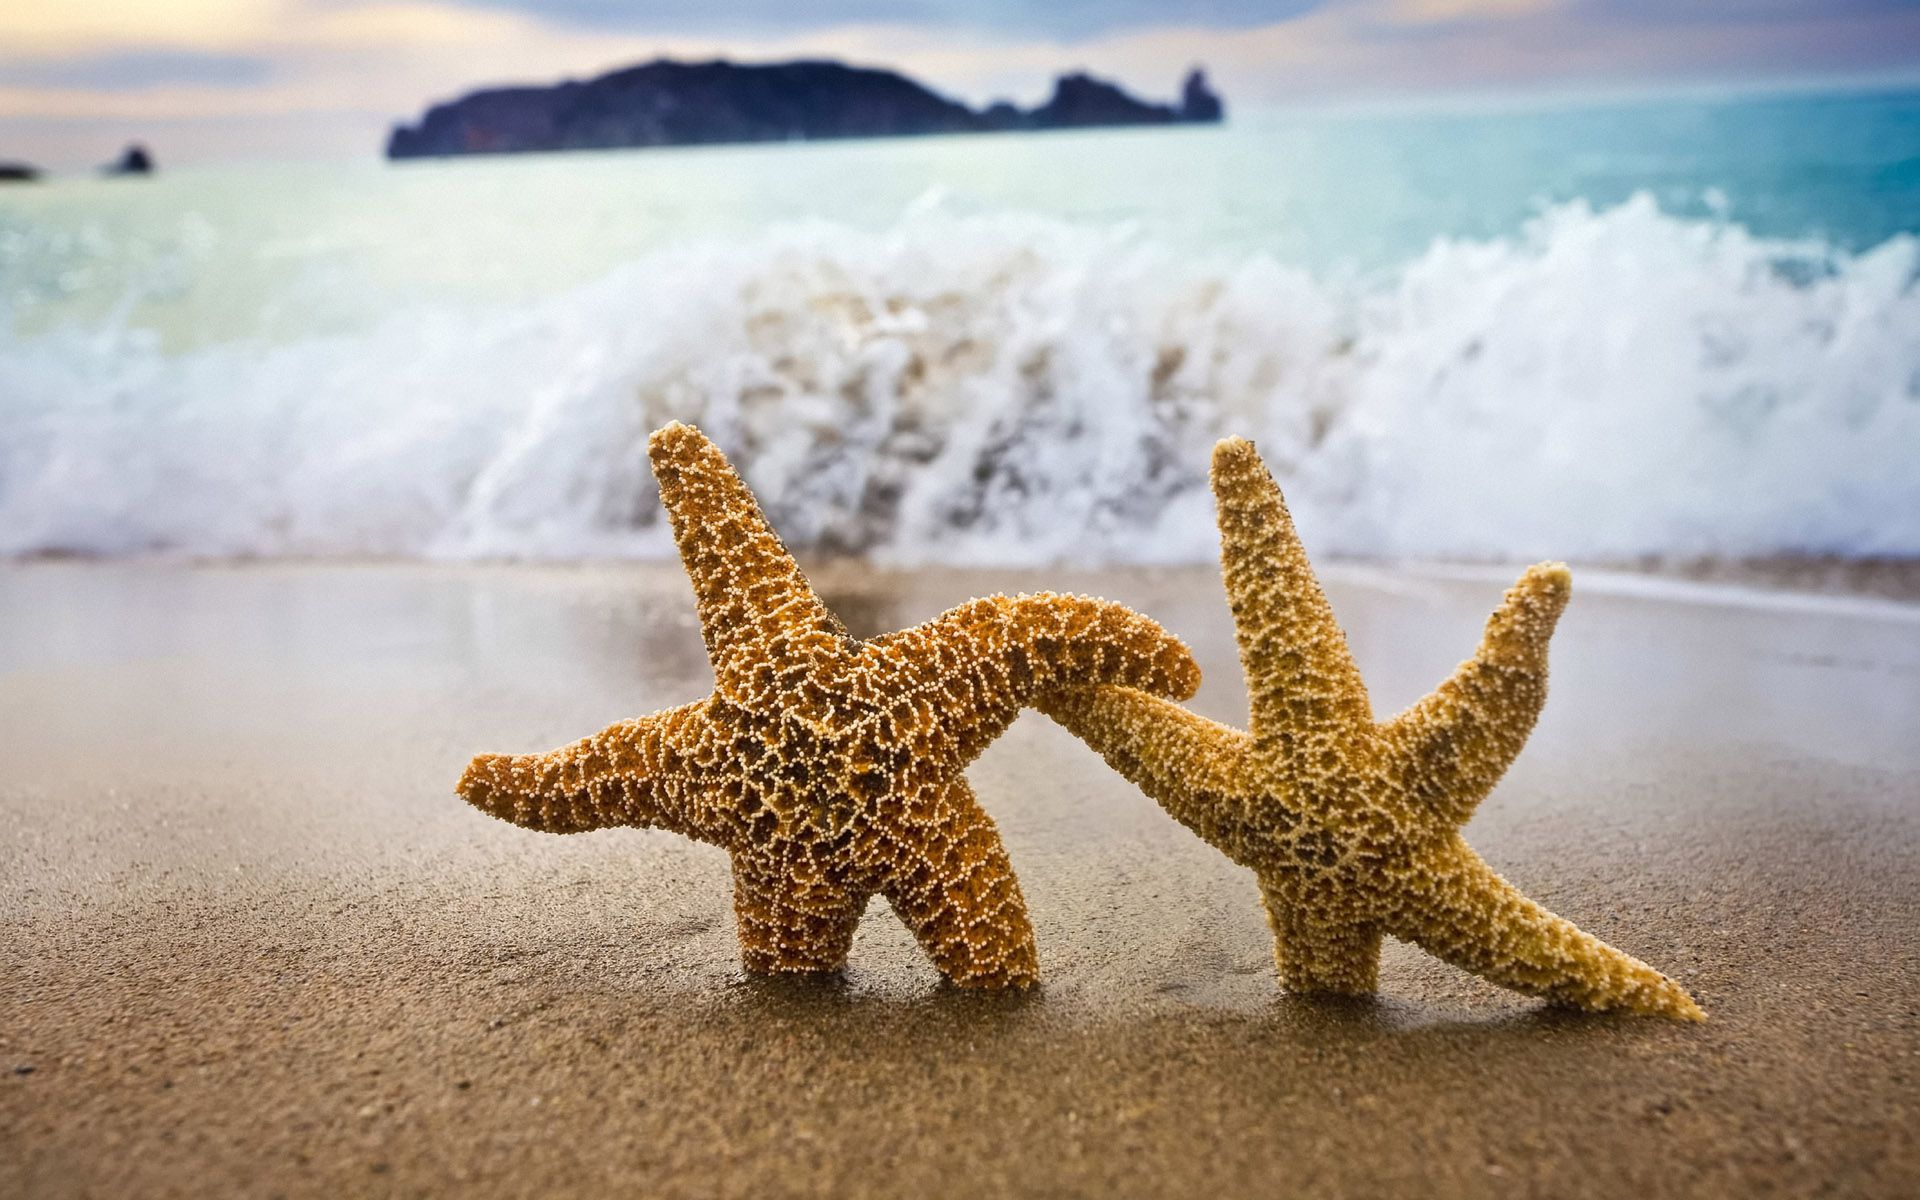 Add a touch of the ocean to your device with our beautiful starfish wallpaper. This stunning image captures the essence of the beach and is guaranteed to brighten up your screen. Let us bring the seaside to you with our starfish wallpaper - download now and experience the beauty for yourself! 